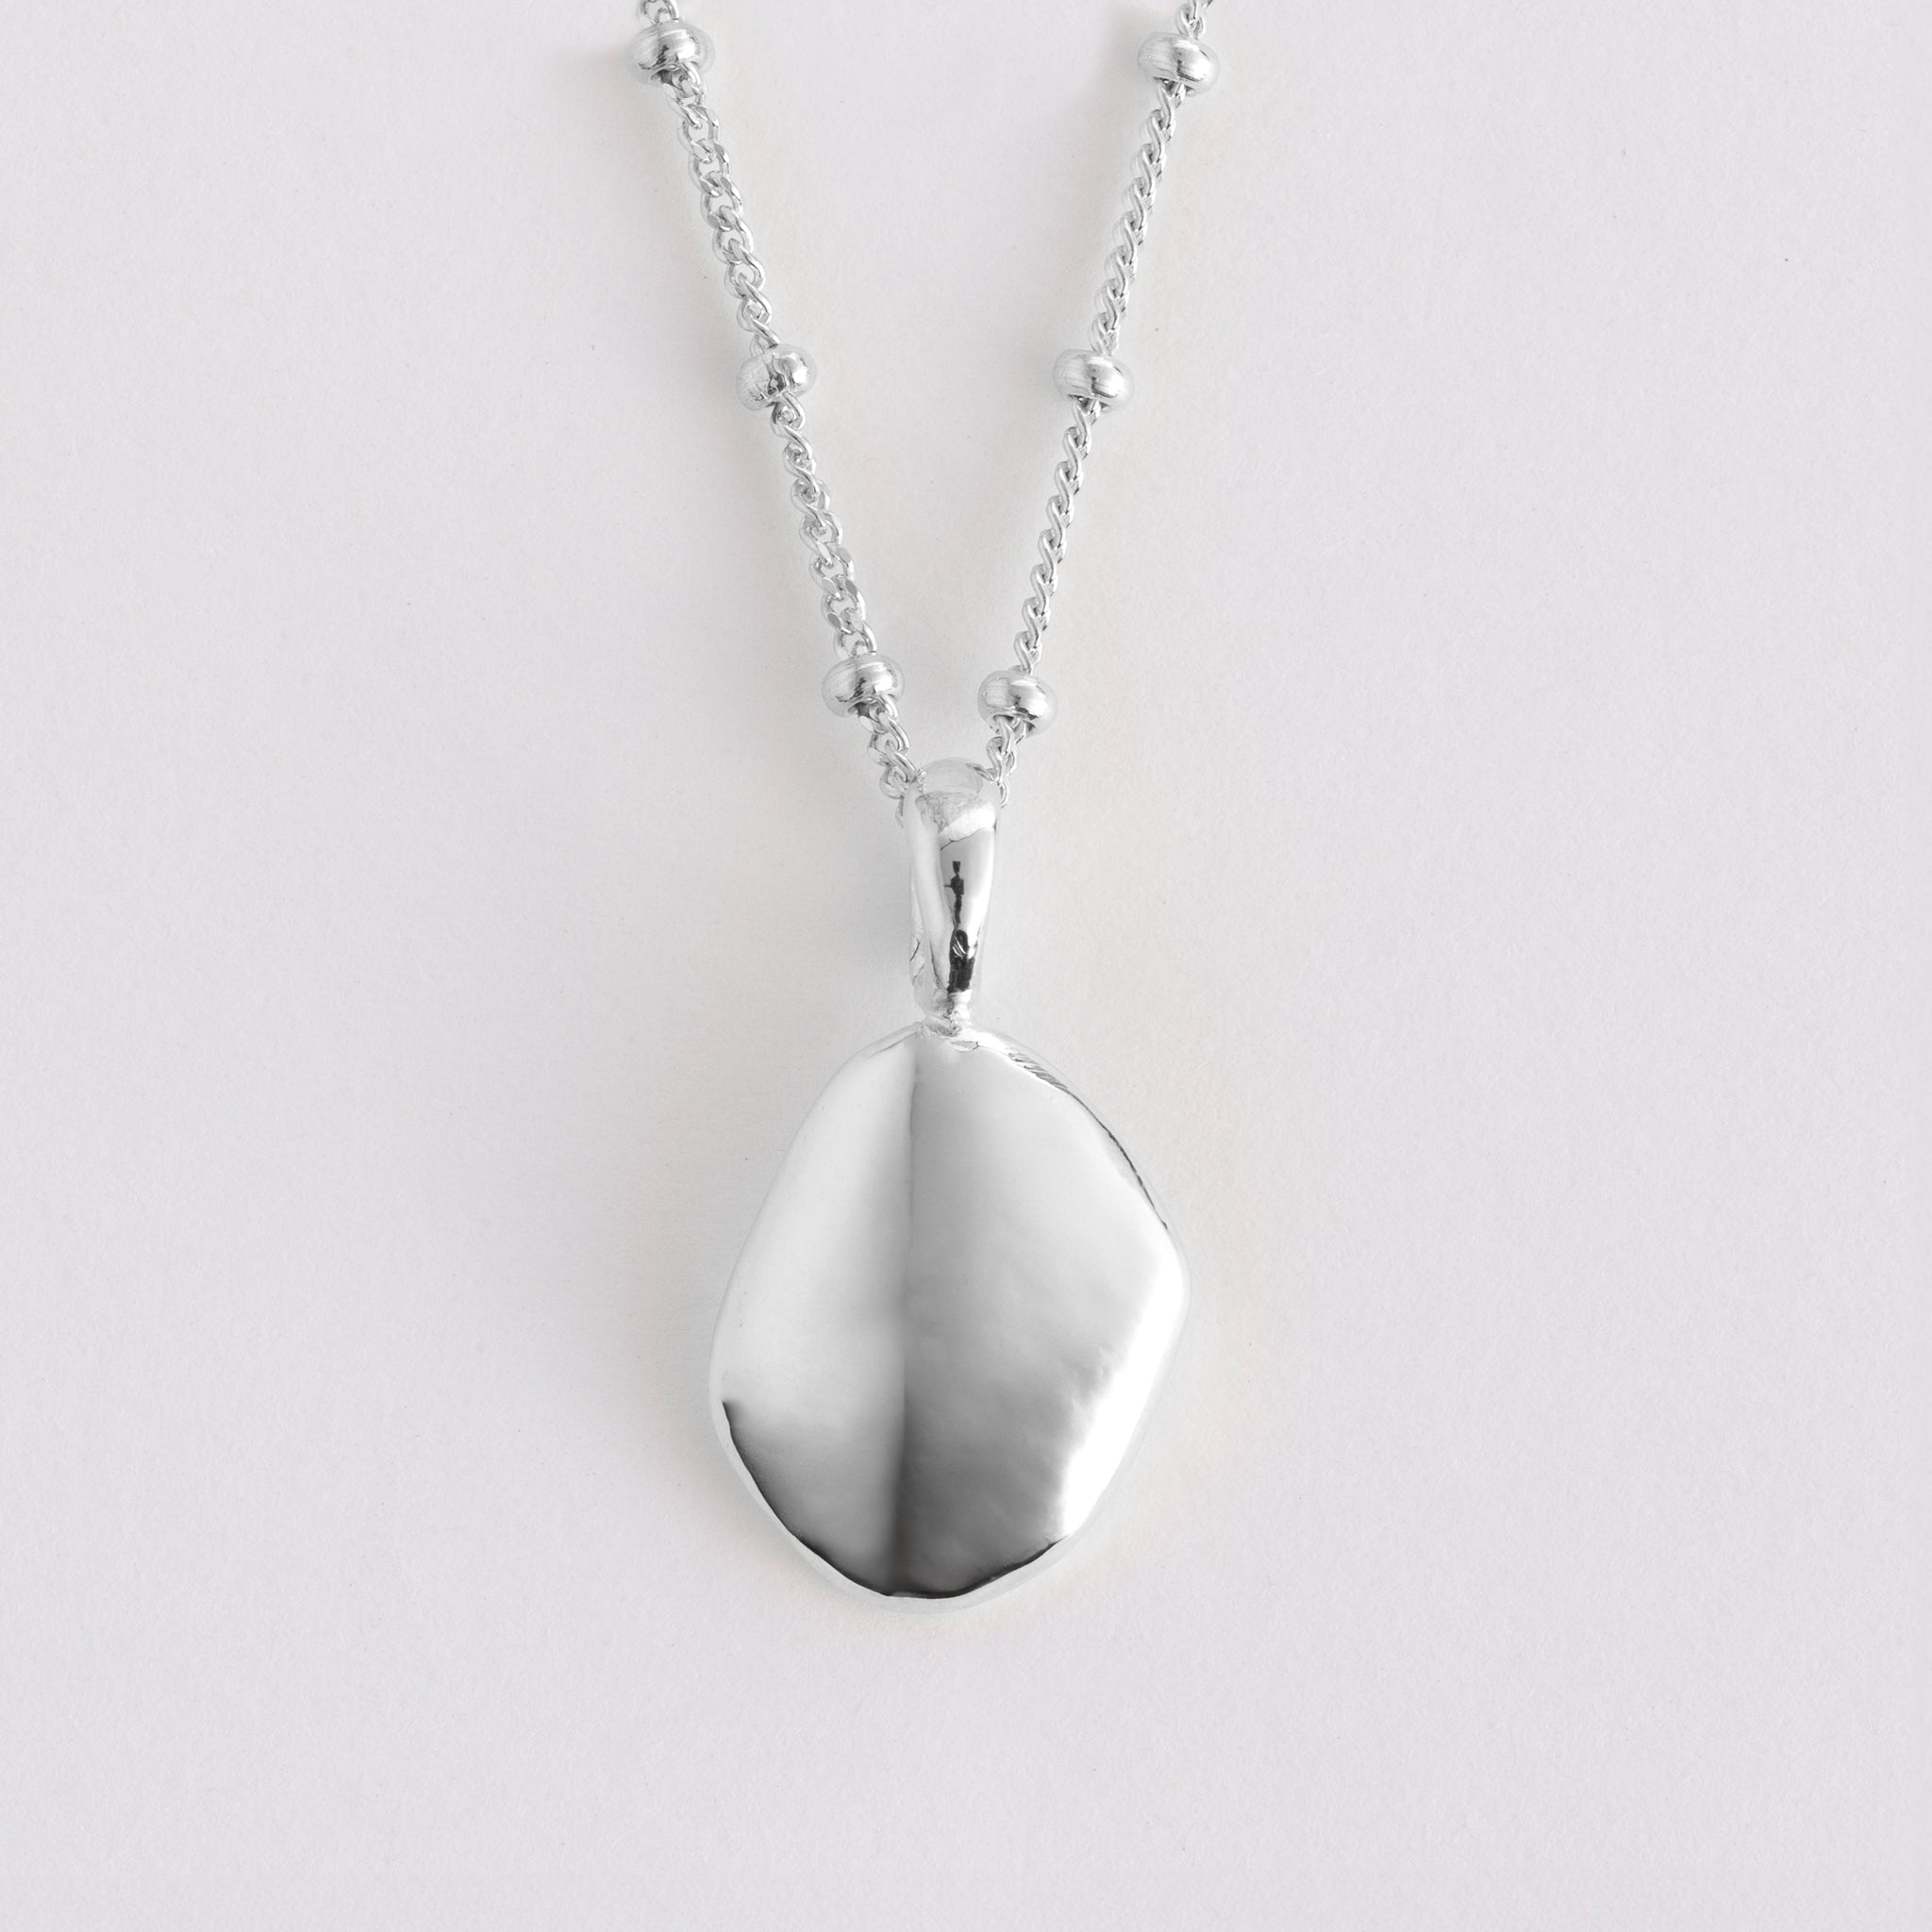 Pendant features a handcut natural pebble shape and is crafted from sterling silver or 18ct gold vermeil.